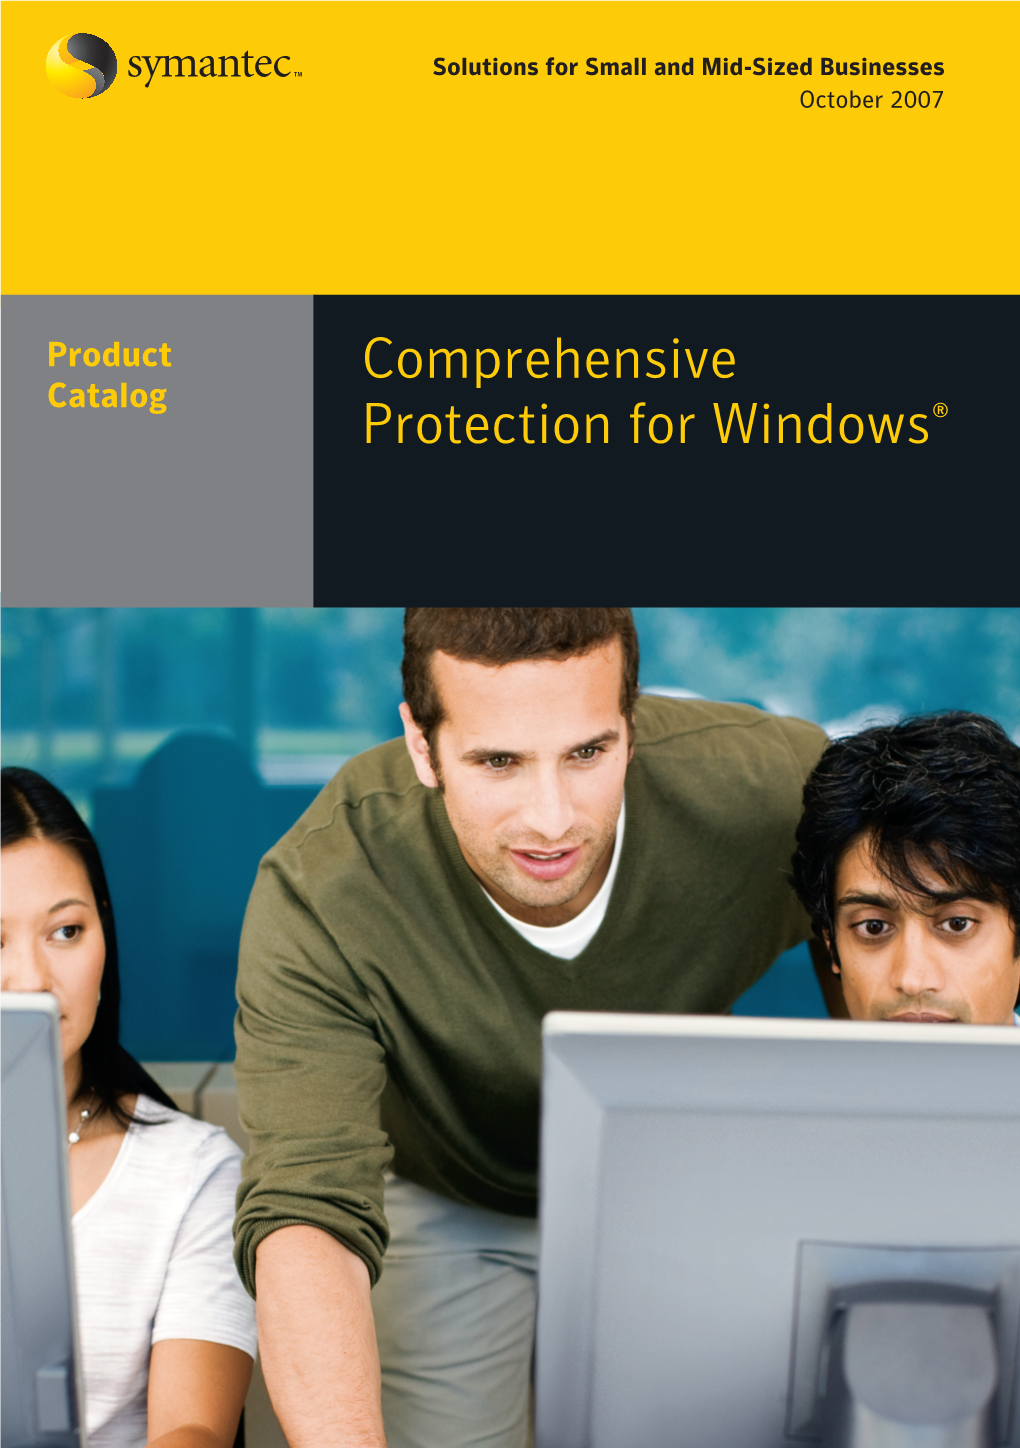 Comprehensive Protection for Windows®